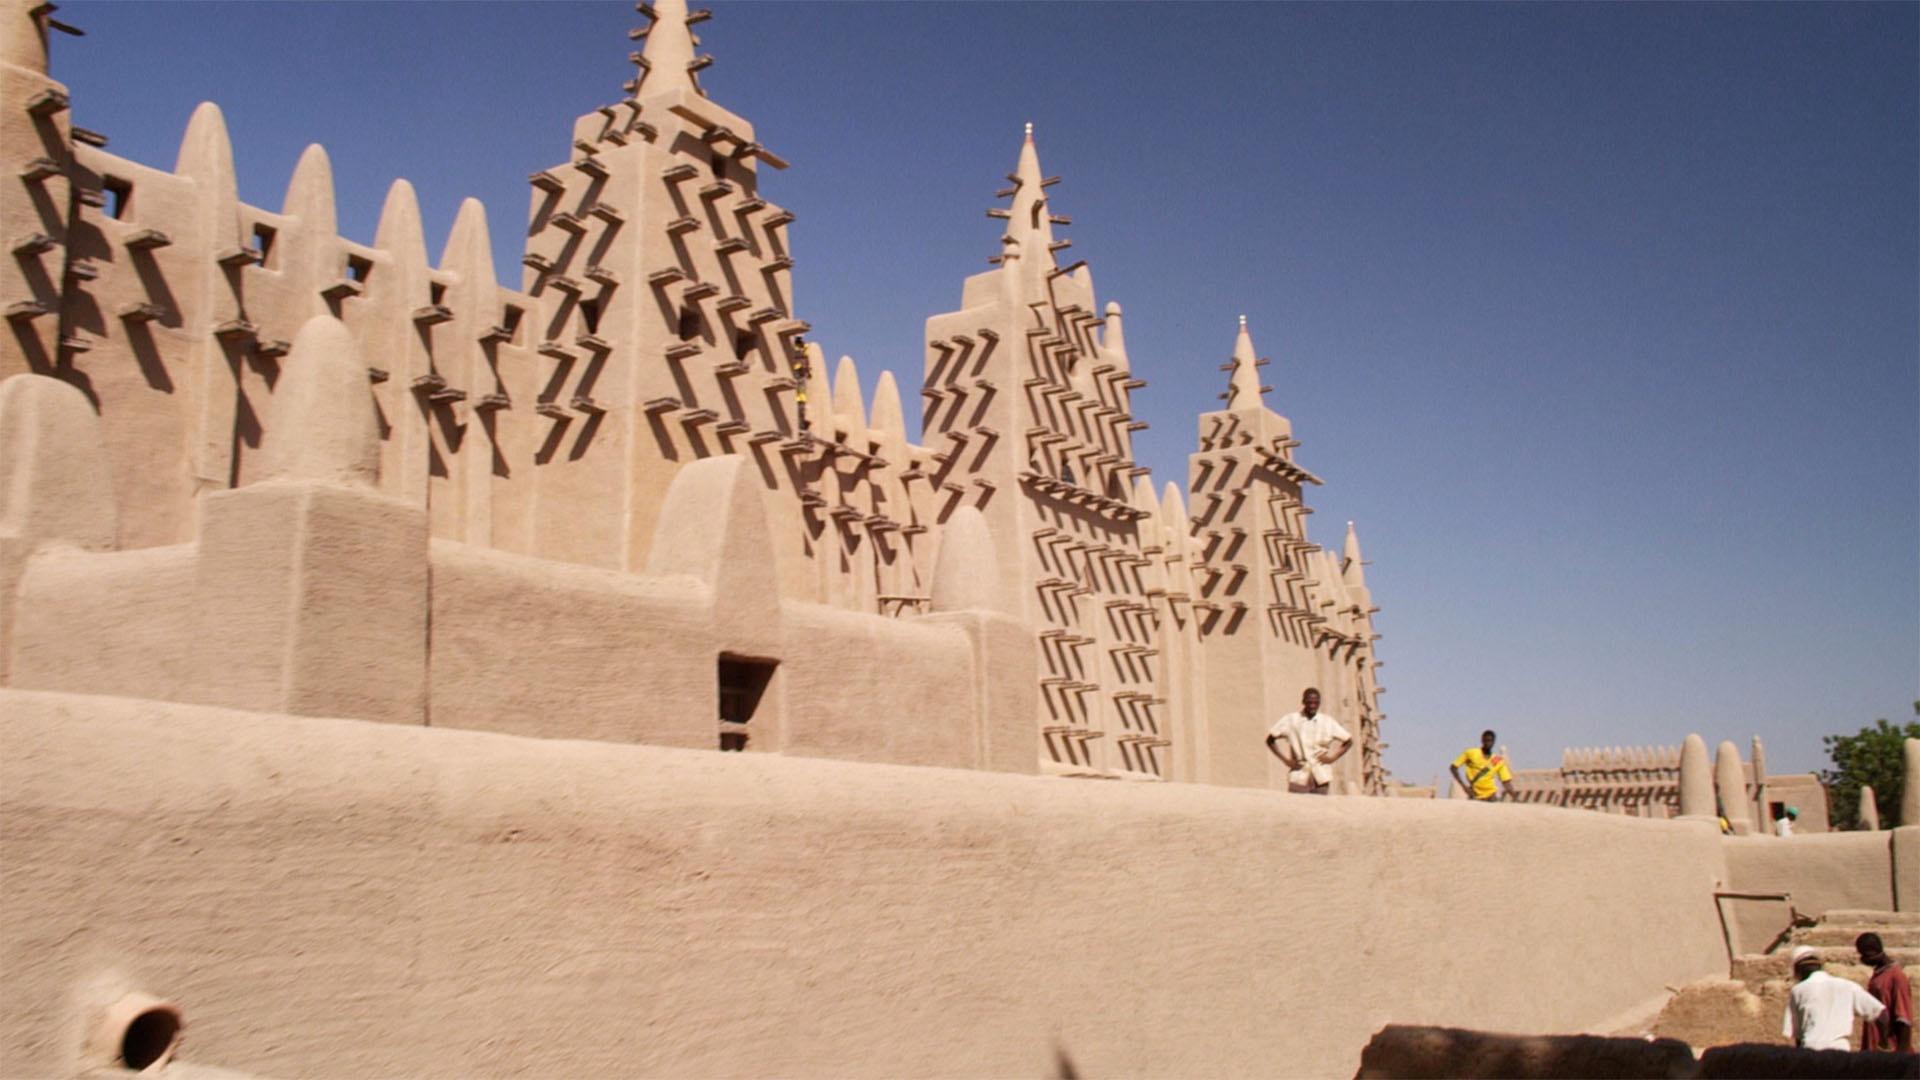 Image of the Great Mosque of Djenné